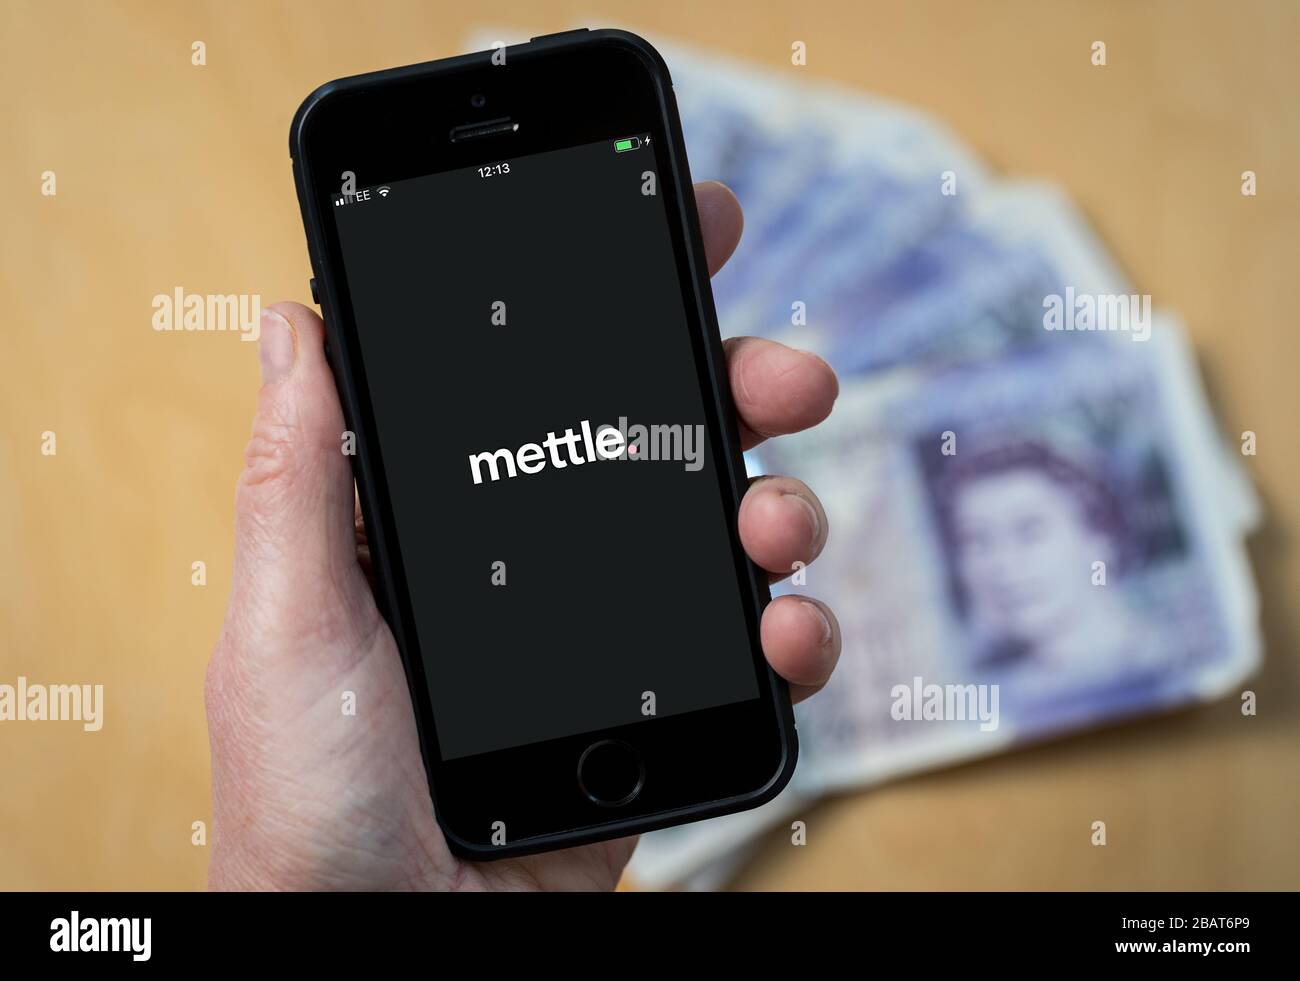 A woman using the mettle accounting app on a mobile phone. (Editorial Use Only) Stock Photo